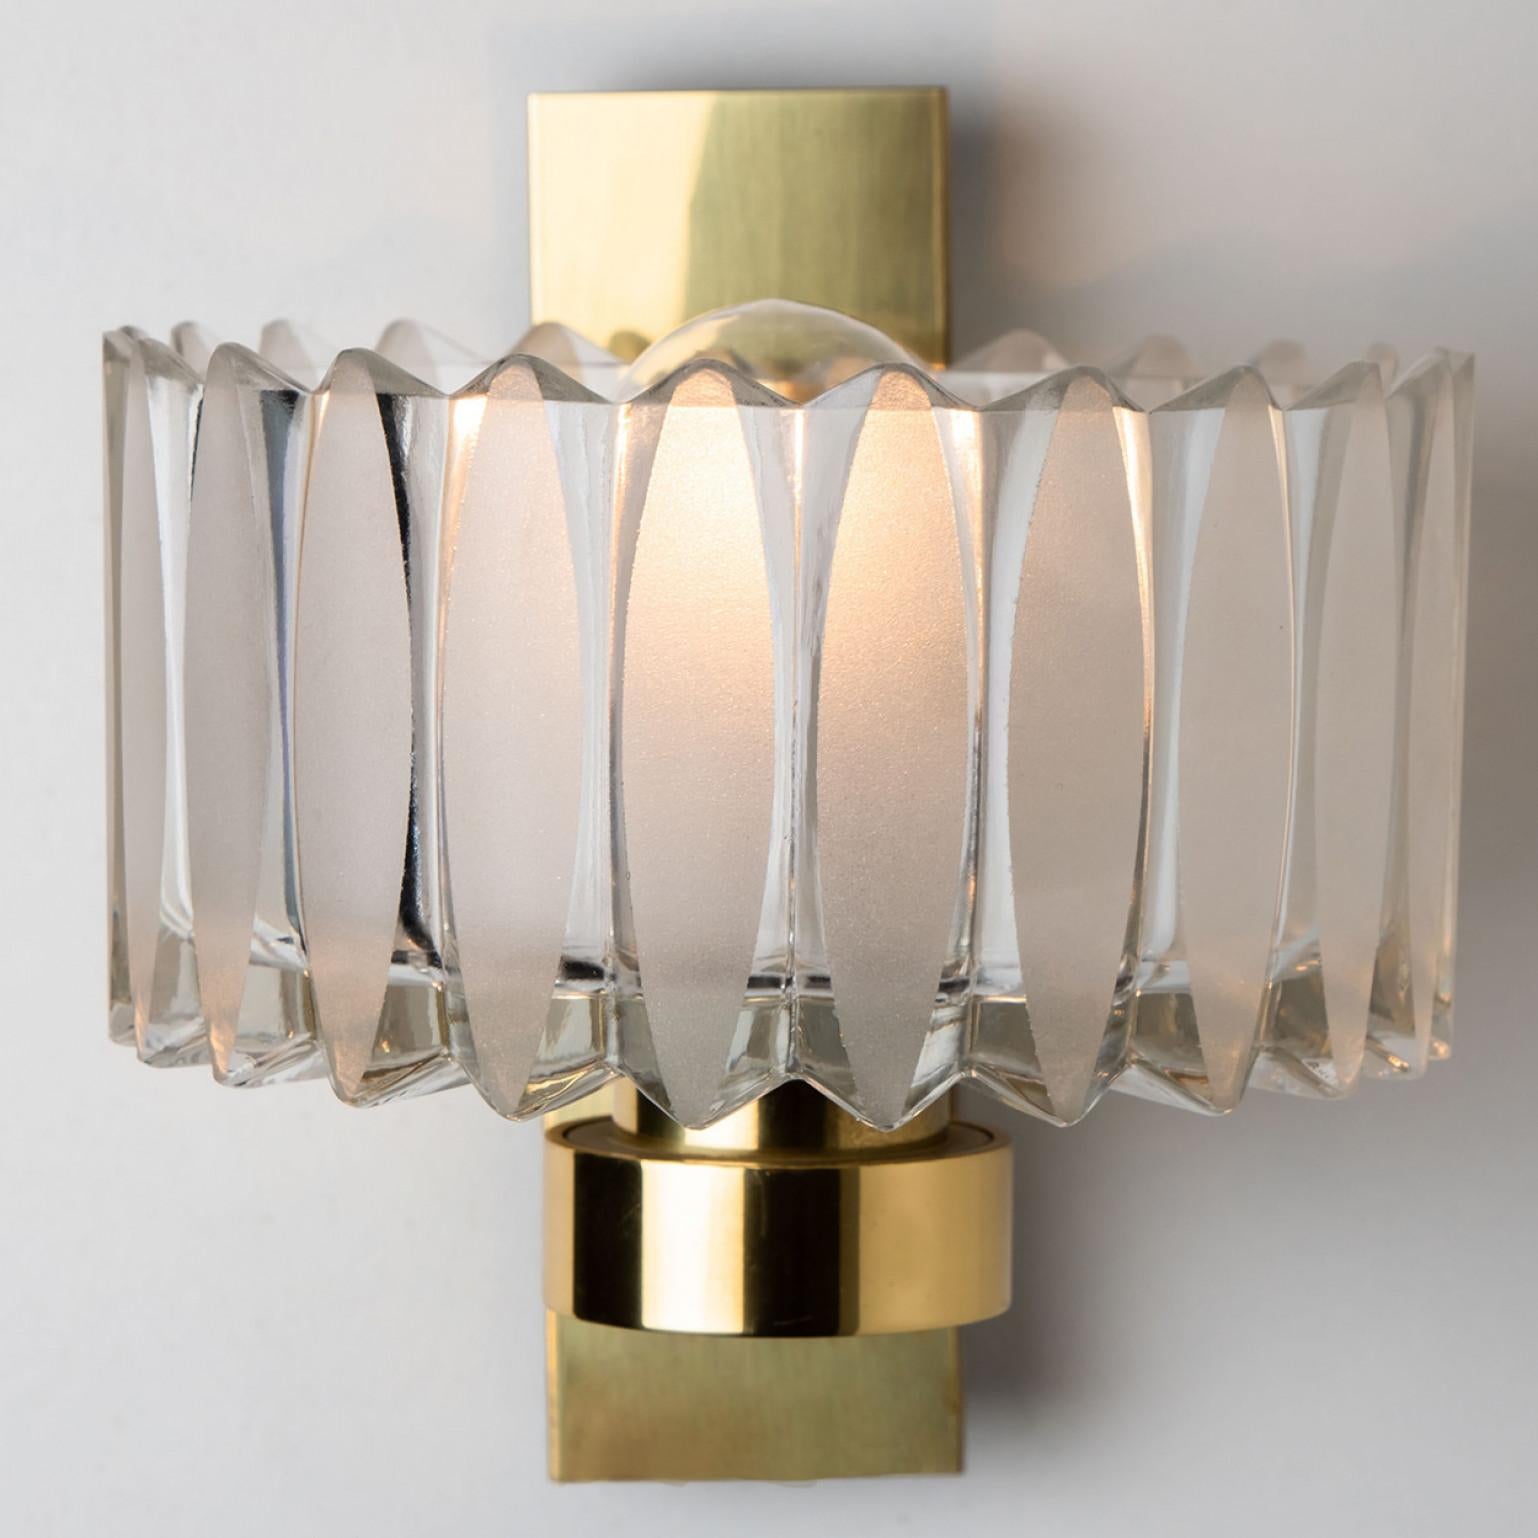 1 of the 2 Sets Hillebrand Brass and Glass Wall Light Fixtures, 1970s For Sale 7